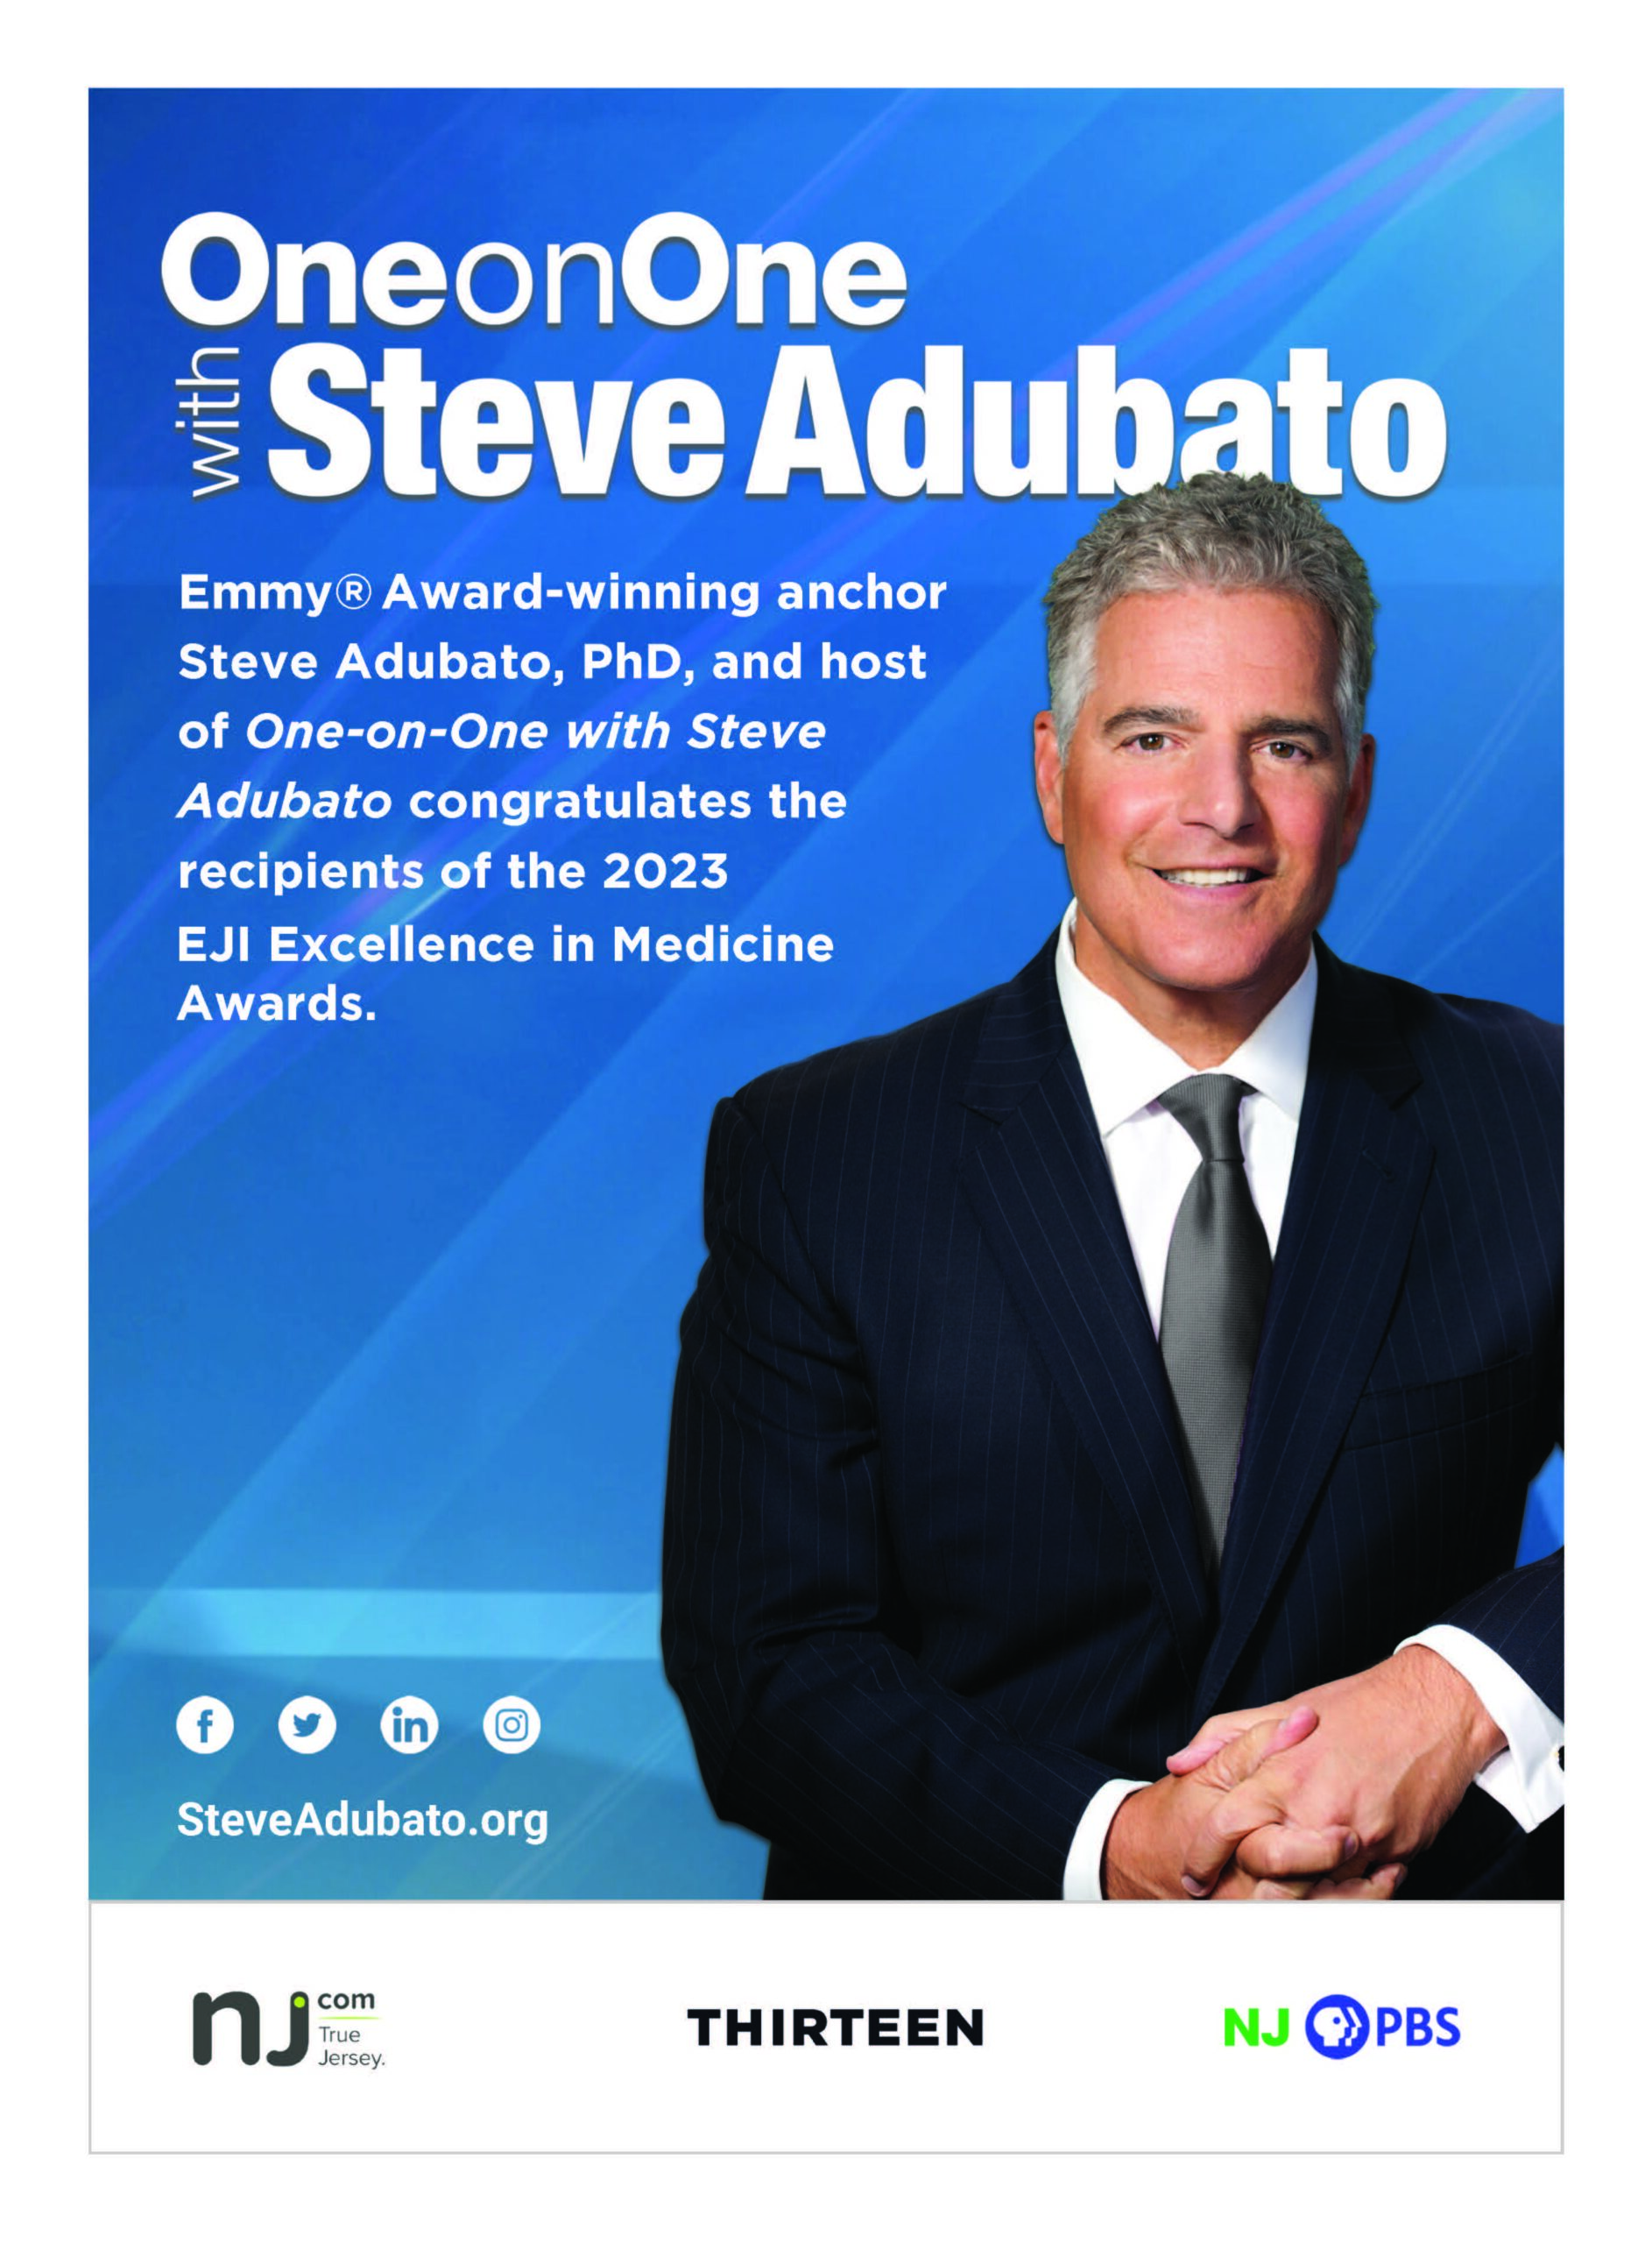 One-on-One with Steve Adubato advertisement